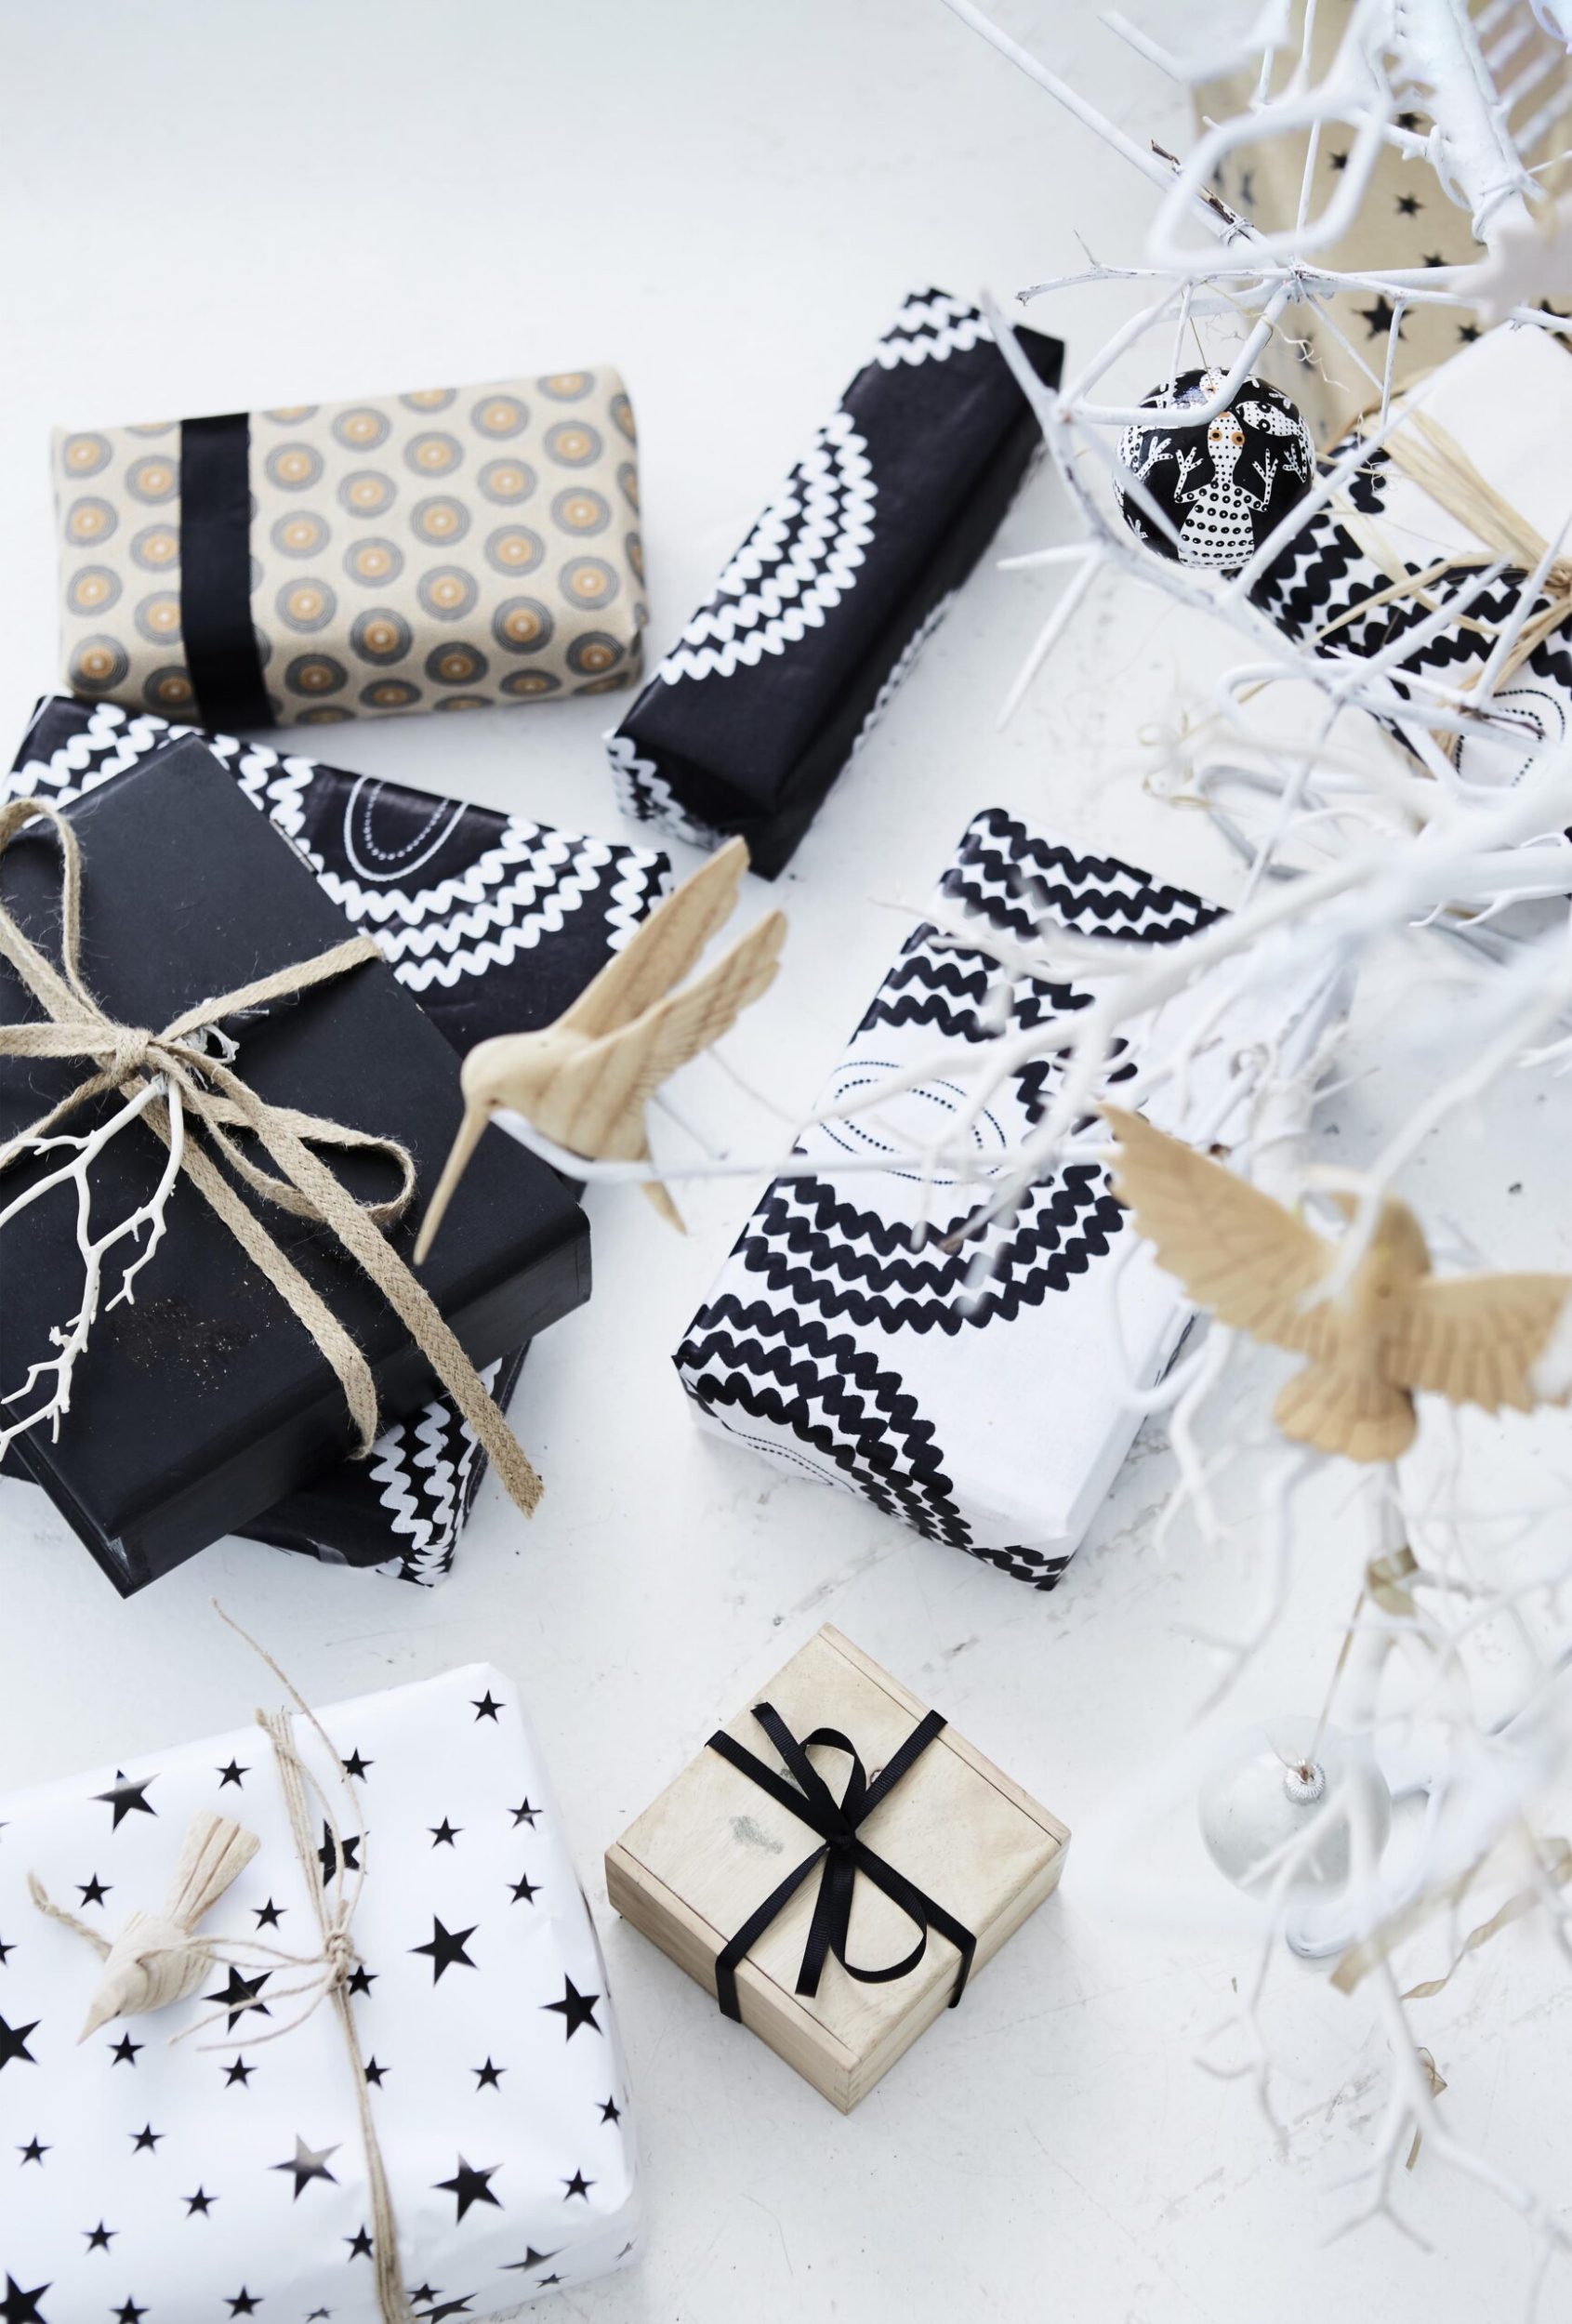 Christmas presents wrapped in black and white wrapping paper